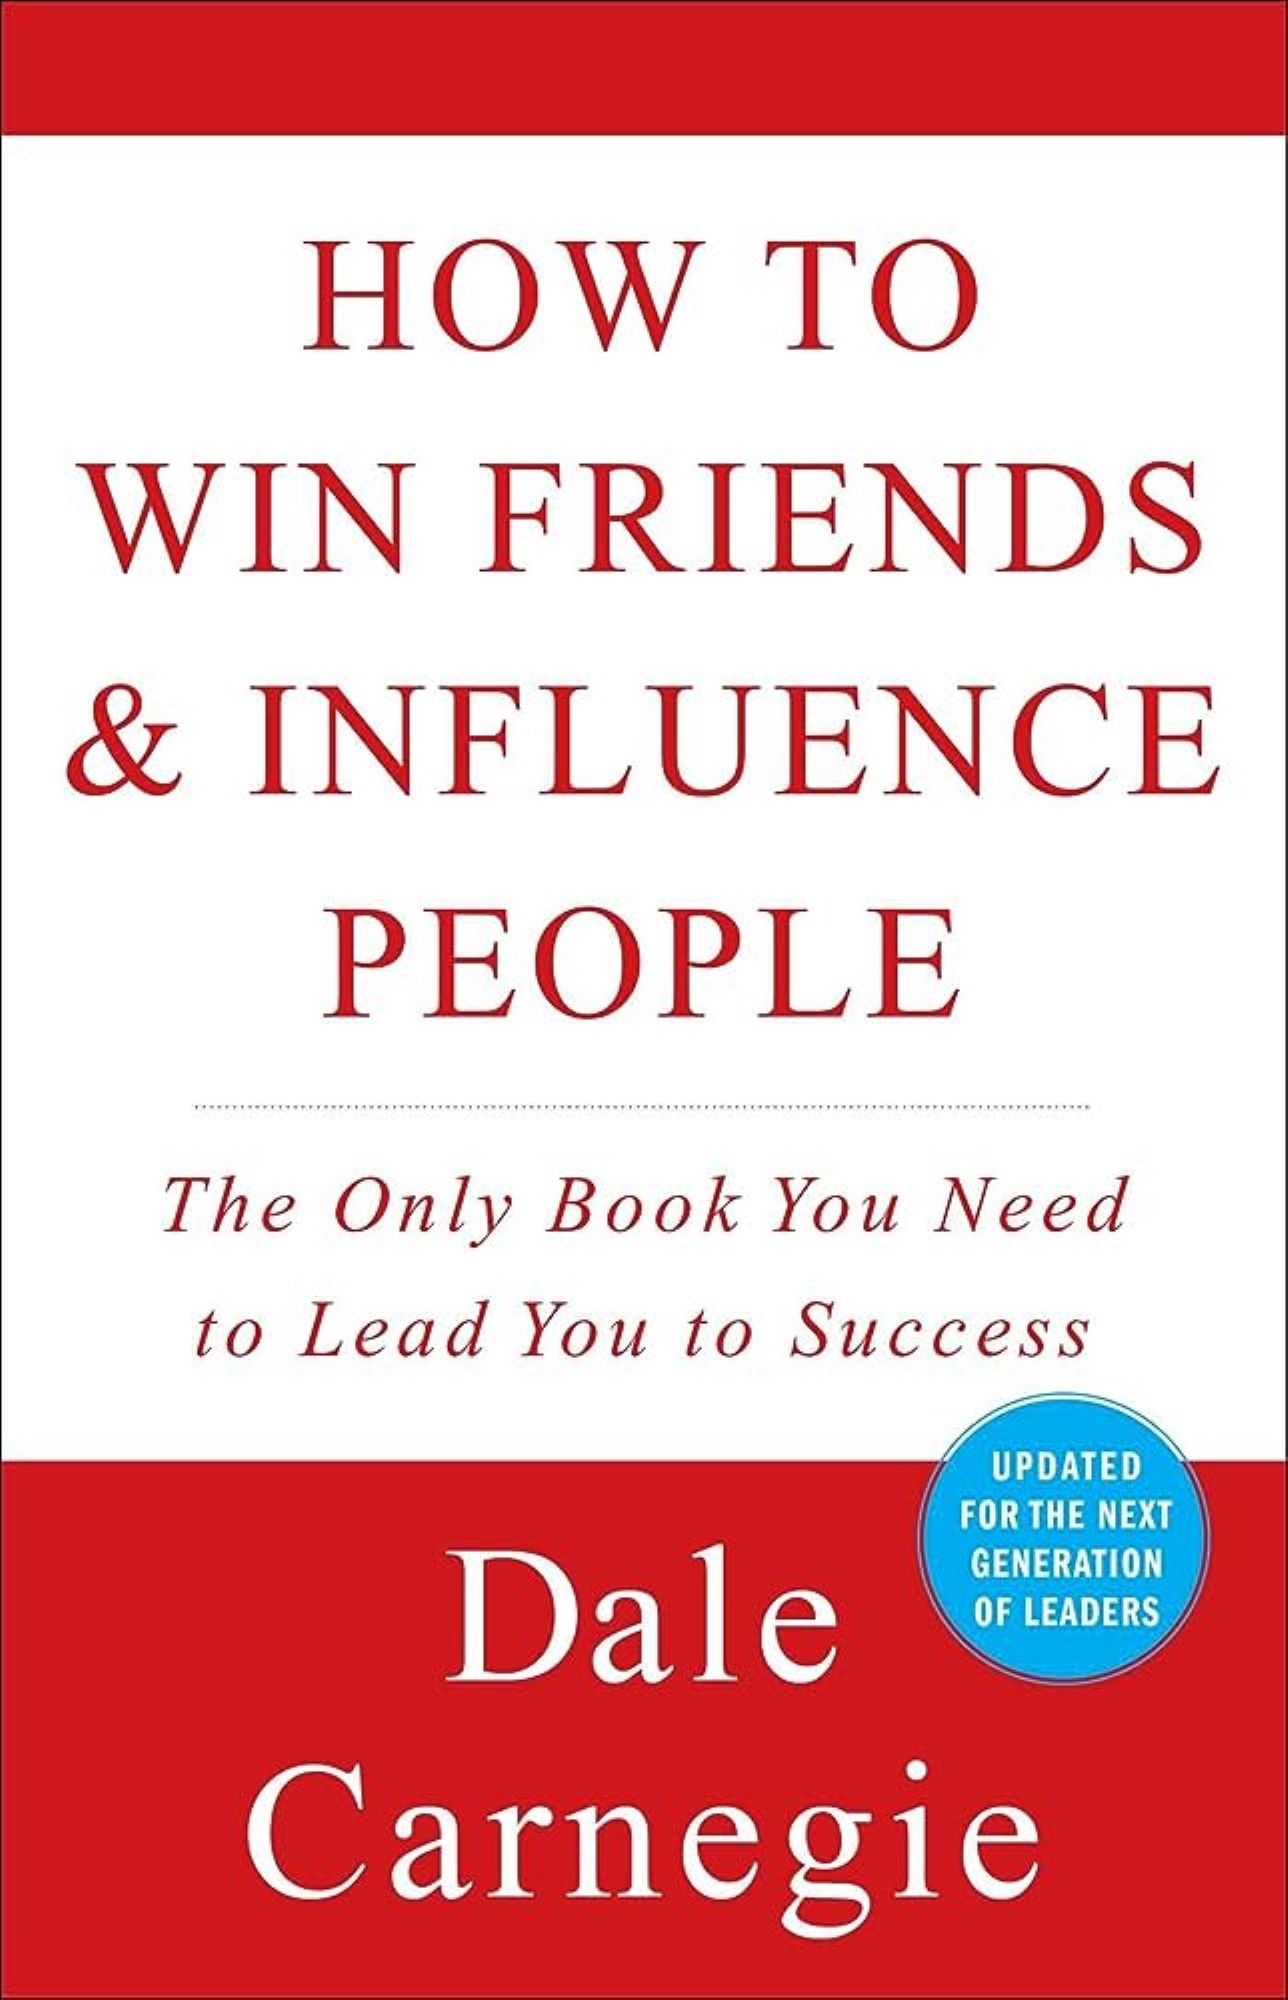 How To Win Friends & Influence People book cover